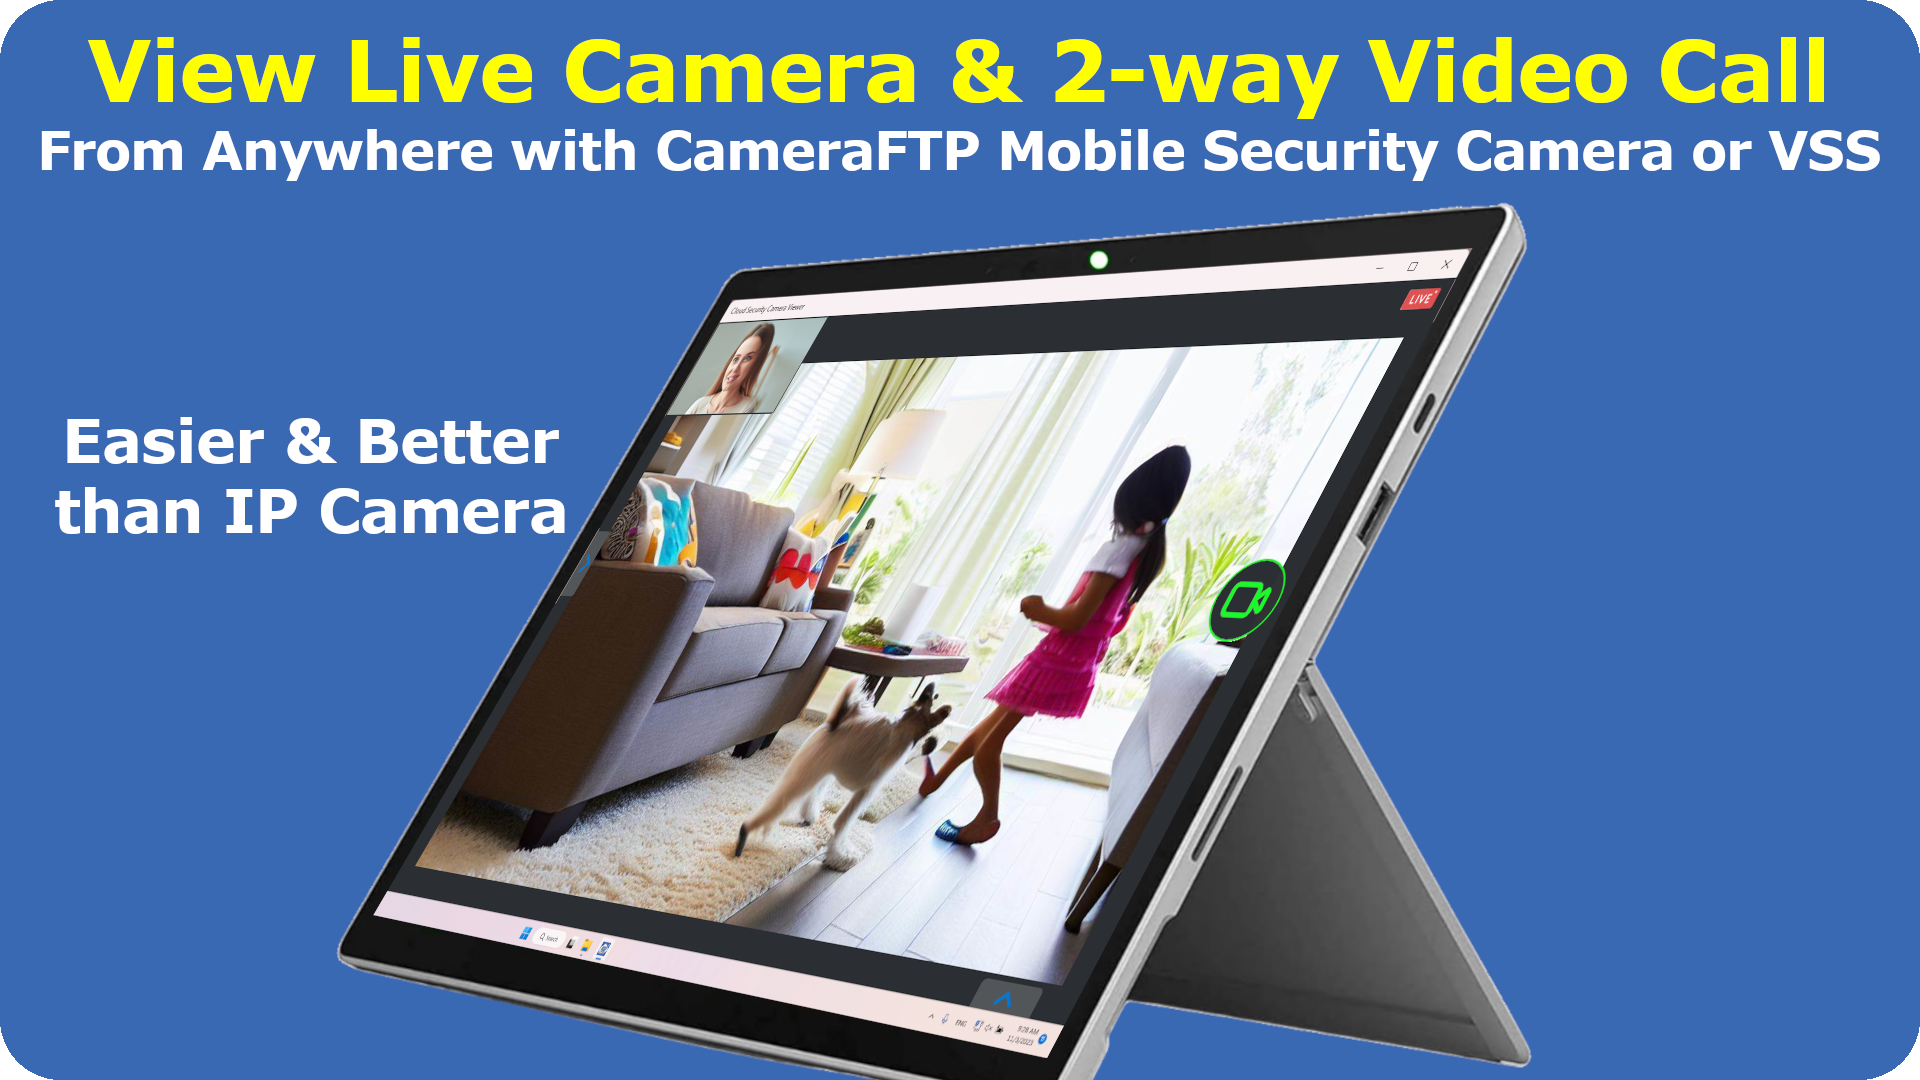 Free live view and 2-way video call from anywhere if you use CameraFTP mobile security camera app or CameraFTP VSS software. It's easier and better than IP cameras or baby monitors.